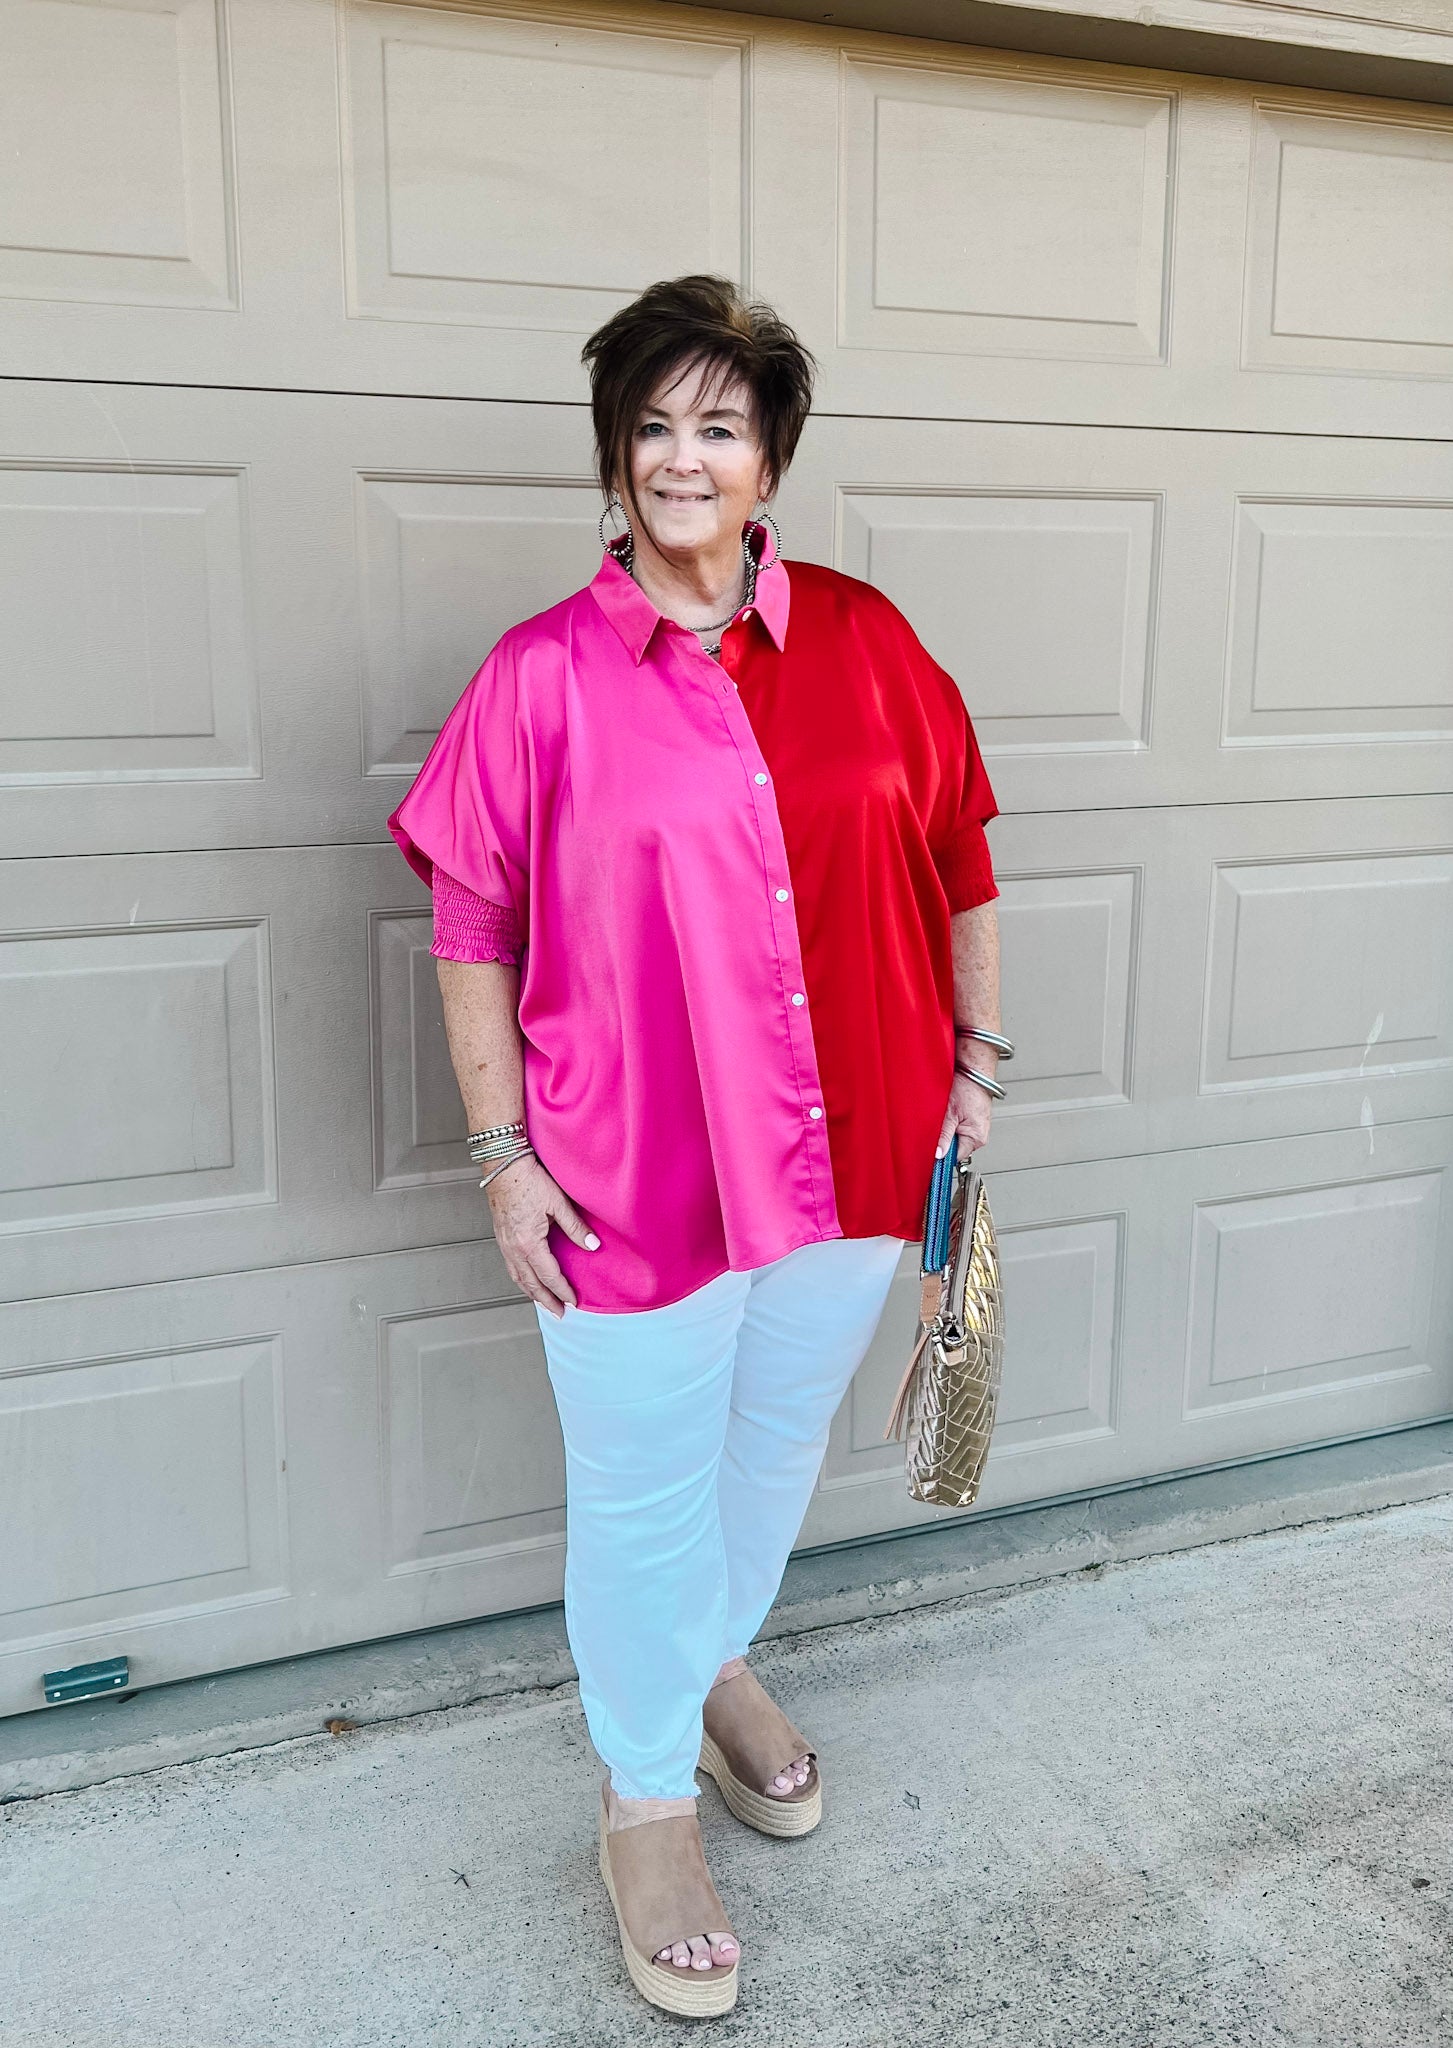 Major Glow Satin Smocked 3/4 Sleeve Button Up Blouse in Pink and Red - Giddy Up Glamour Boutique